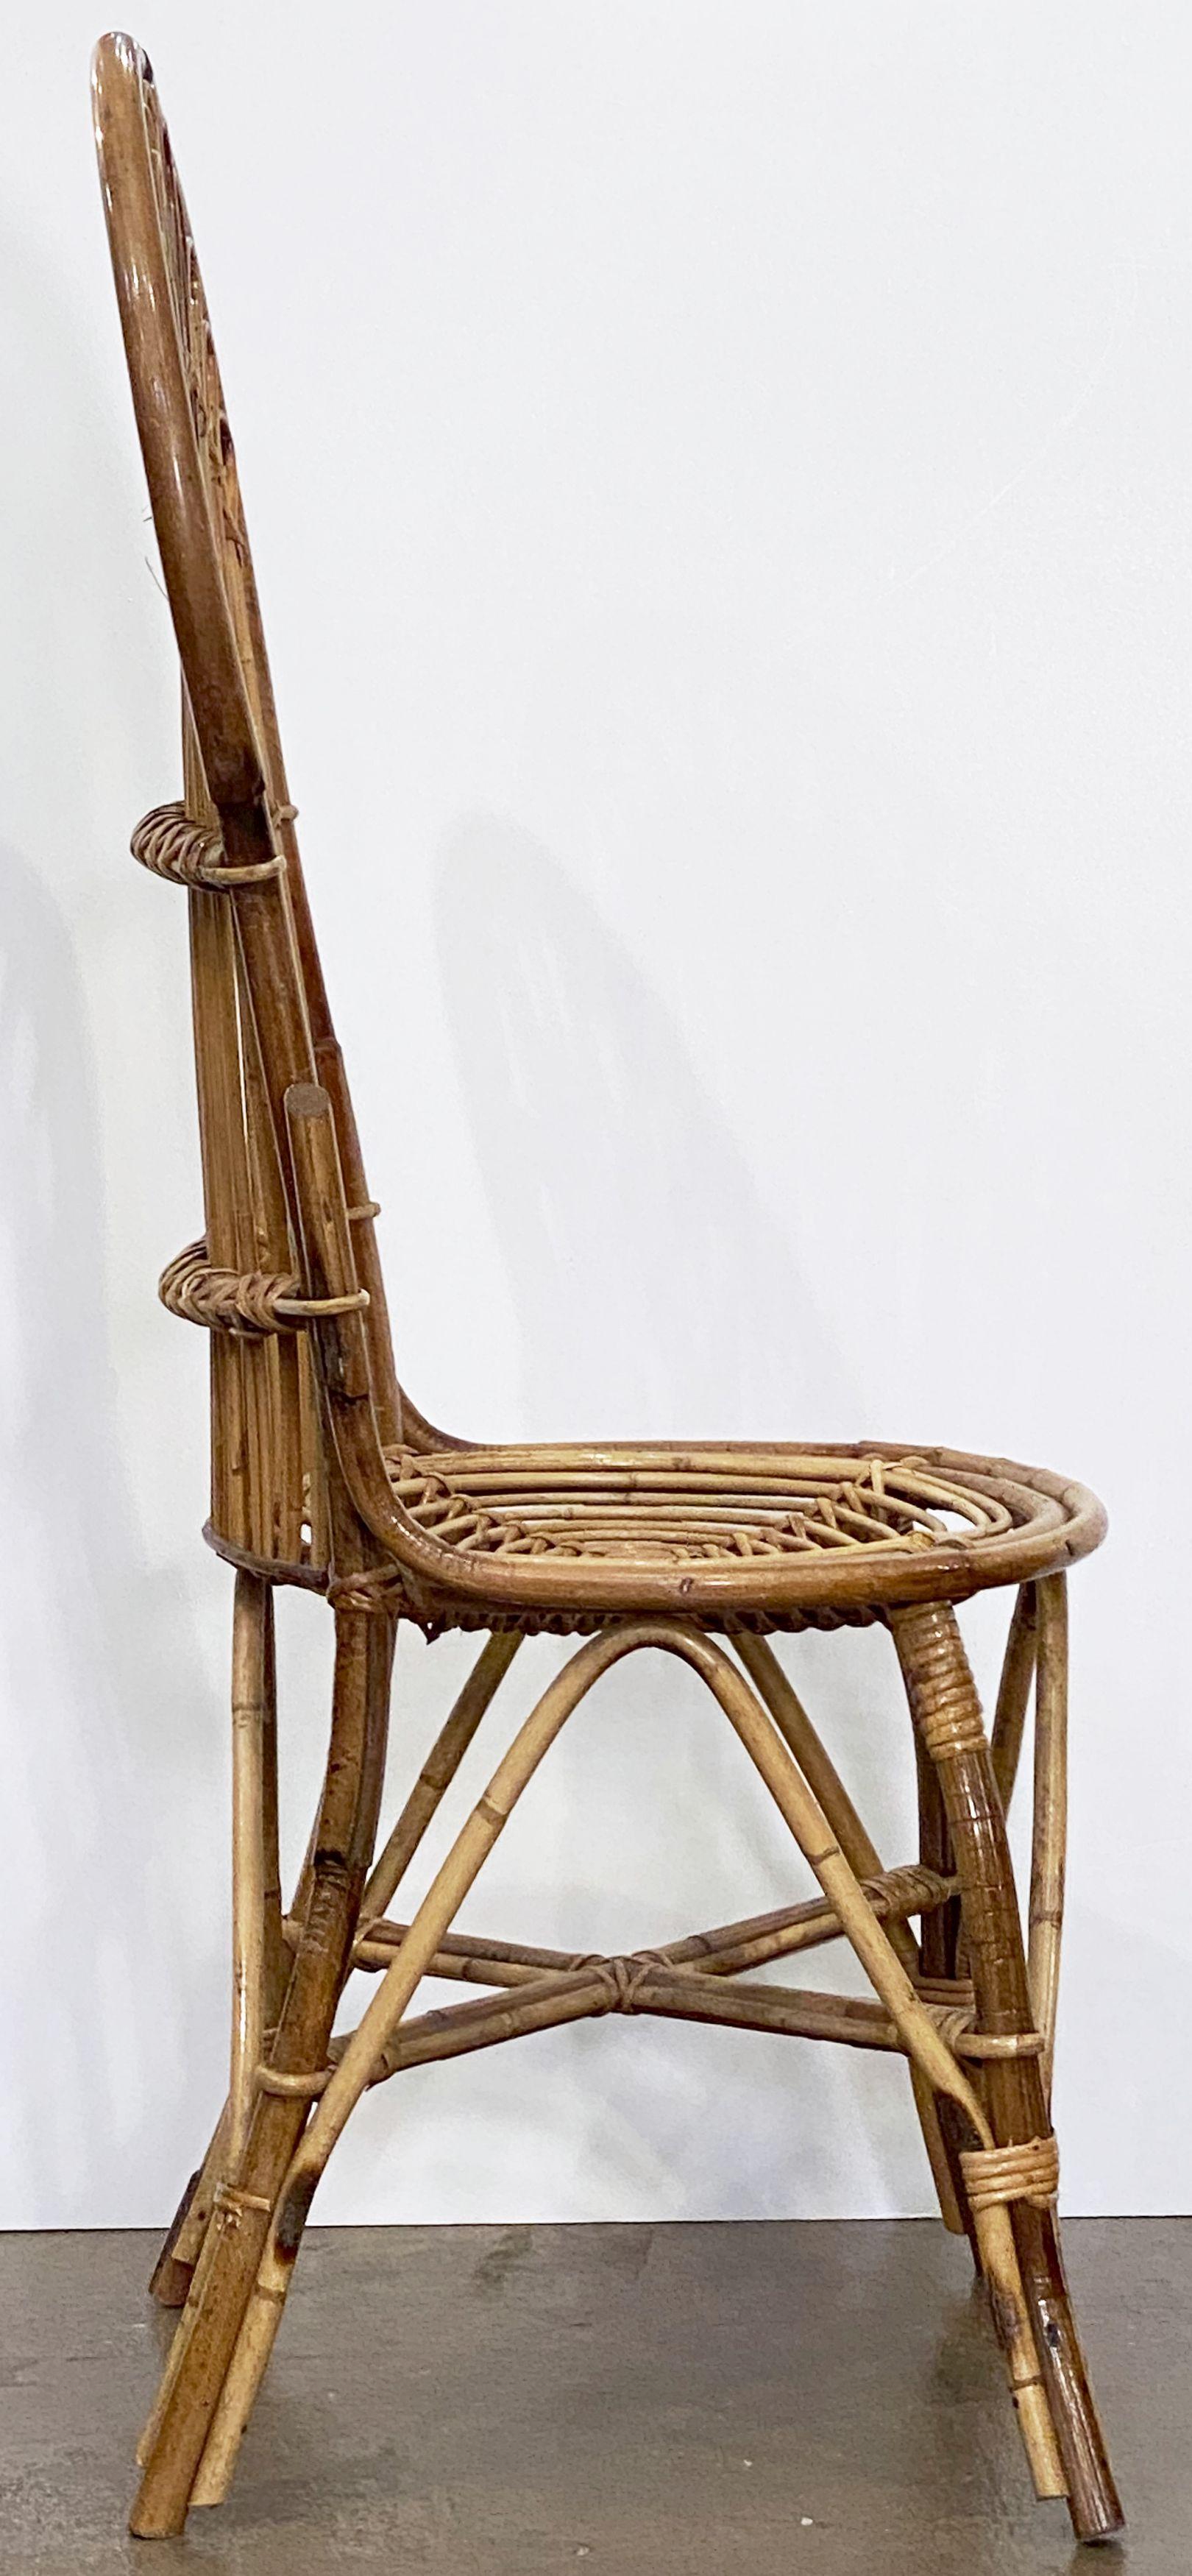 Italian Fan-Backed Chair of Rattan and Bamboo from the Mid-20th Century For Sale 9